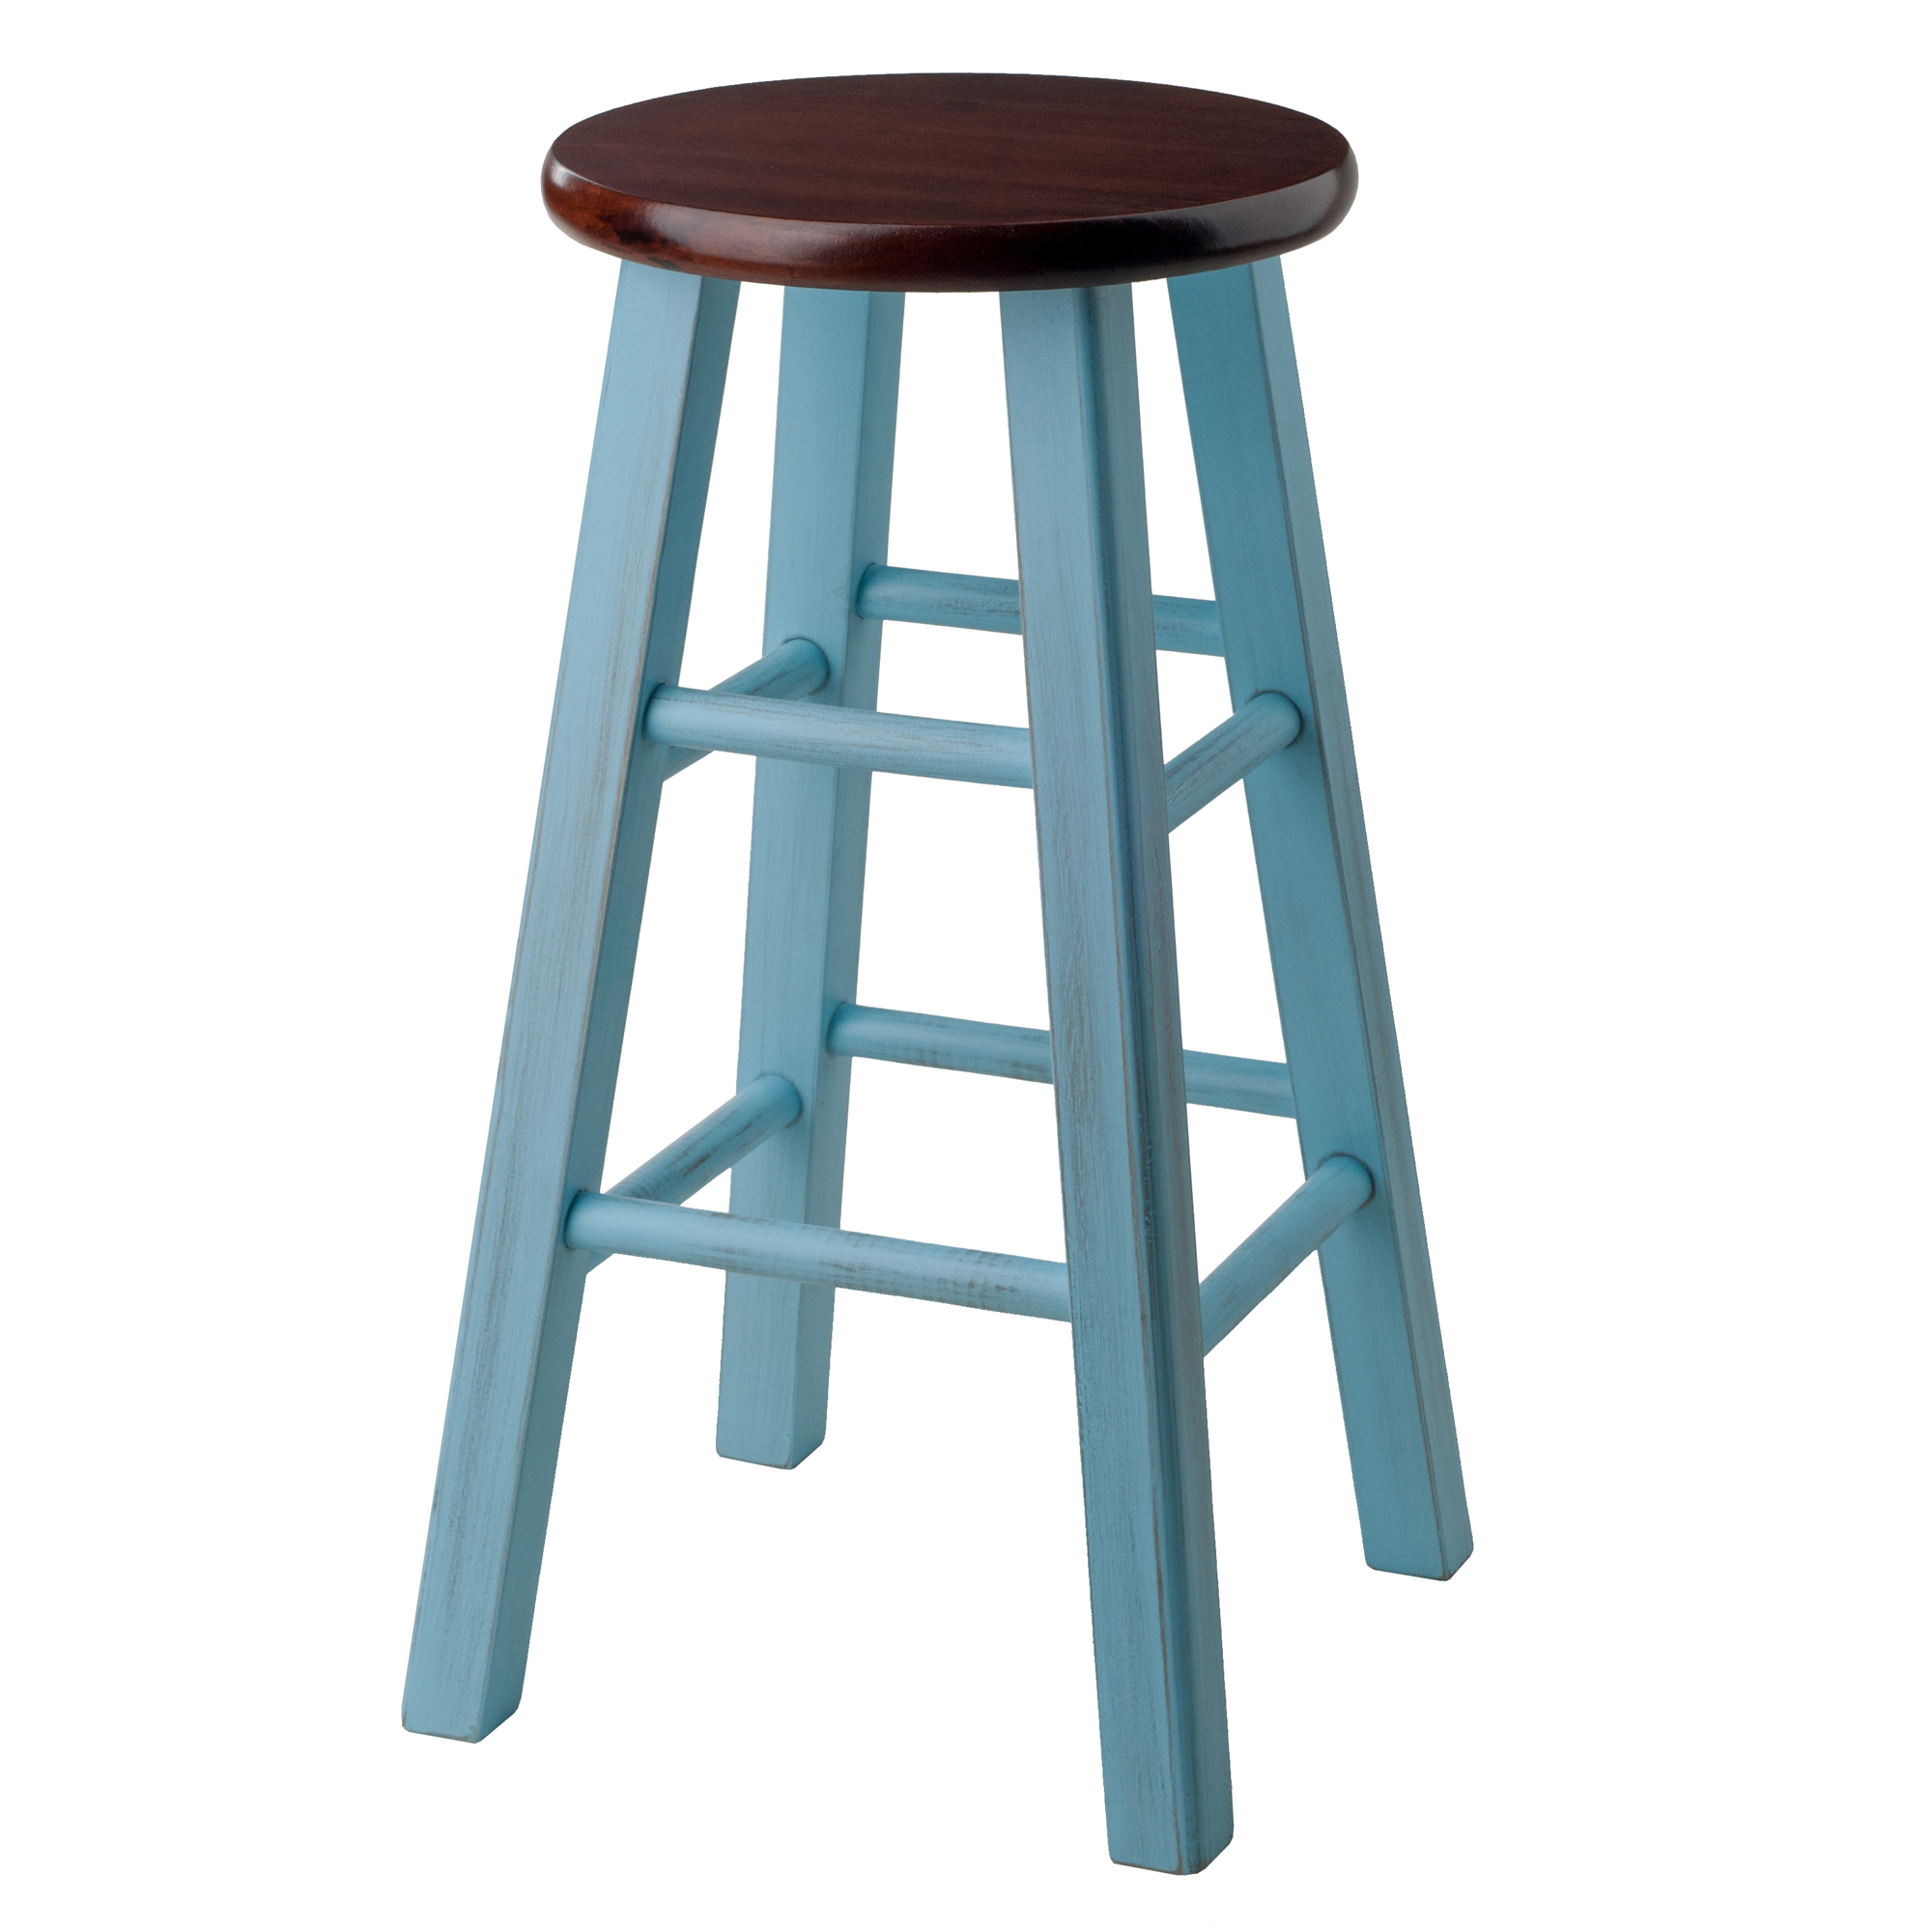 Winsome Wood Ivy 24" Counter Stool, Rustic Light Blue & Walnut Finish - image 1 of 6